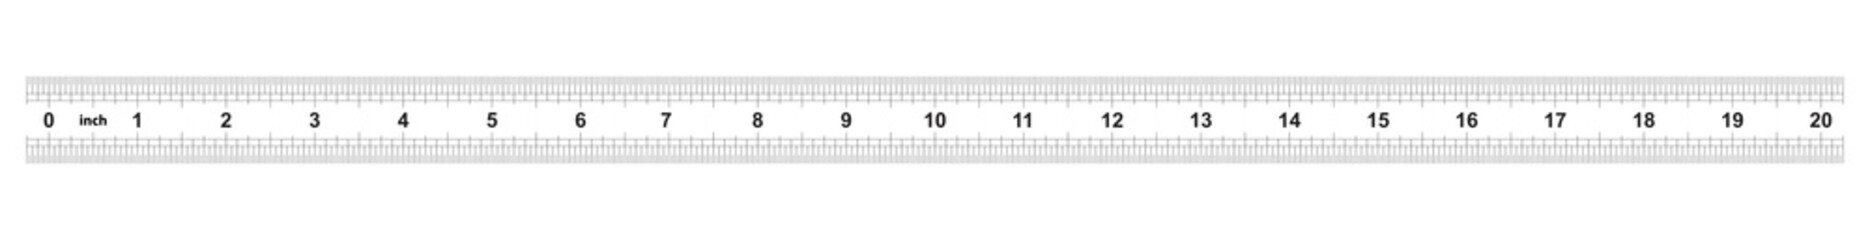 Double sided 20 inch ruler. The price of division - 32 divisions by inch. Exact length measurement device. Calibration grid.